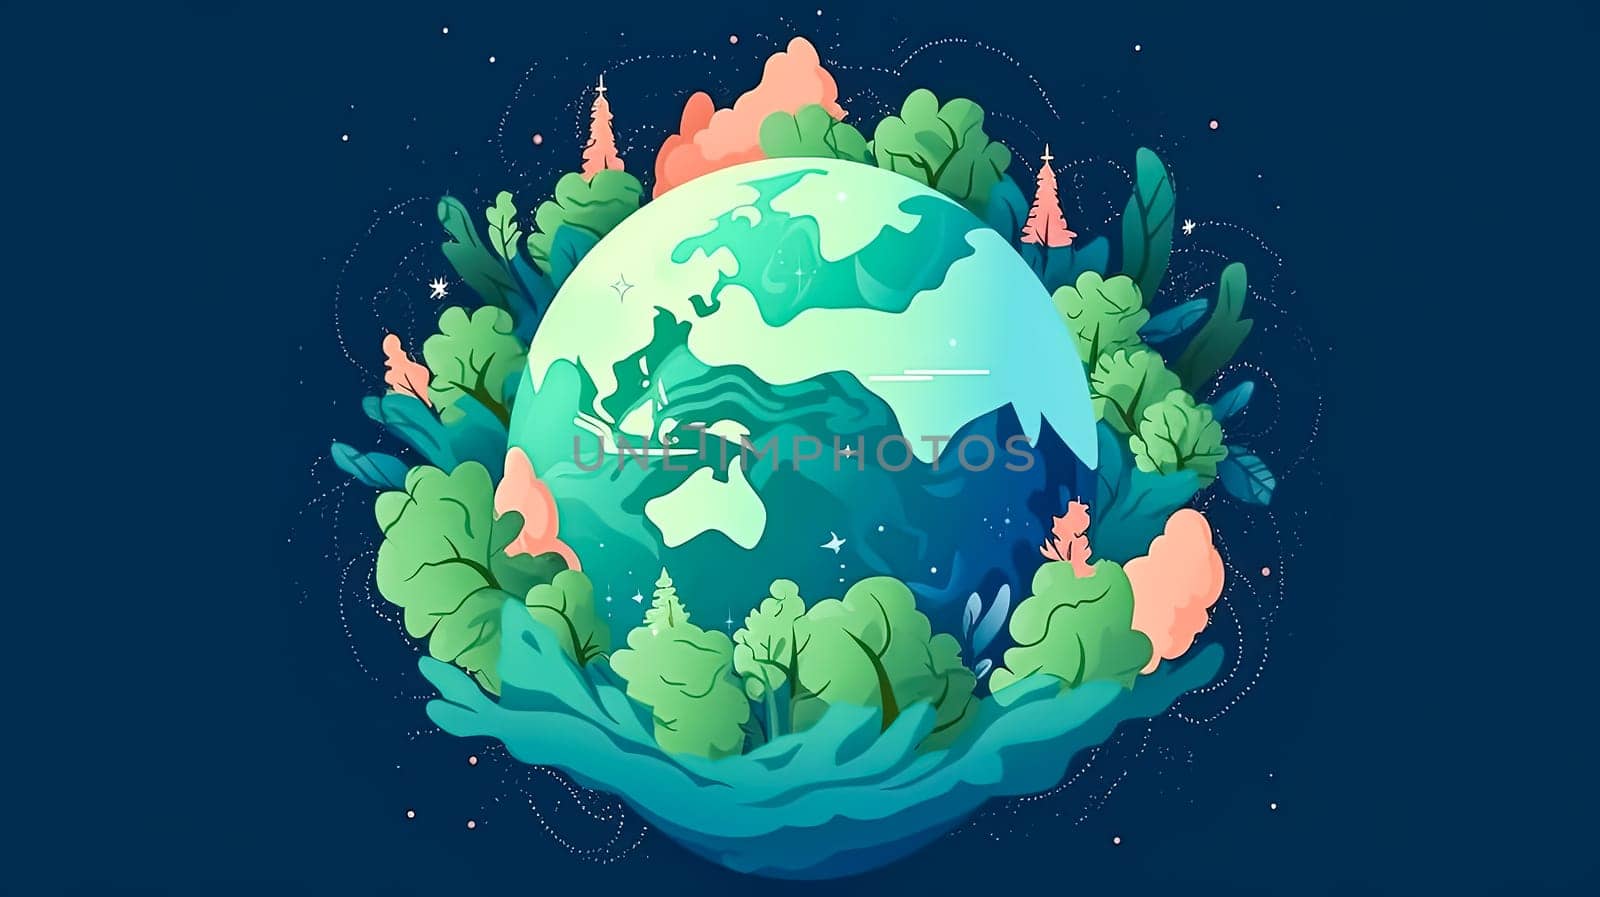 Earth covered in a blanket of green a joyous tribute to nature conservation by Alla_Morozova93